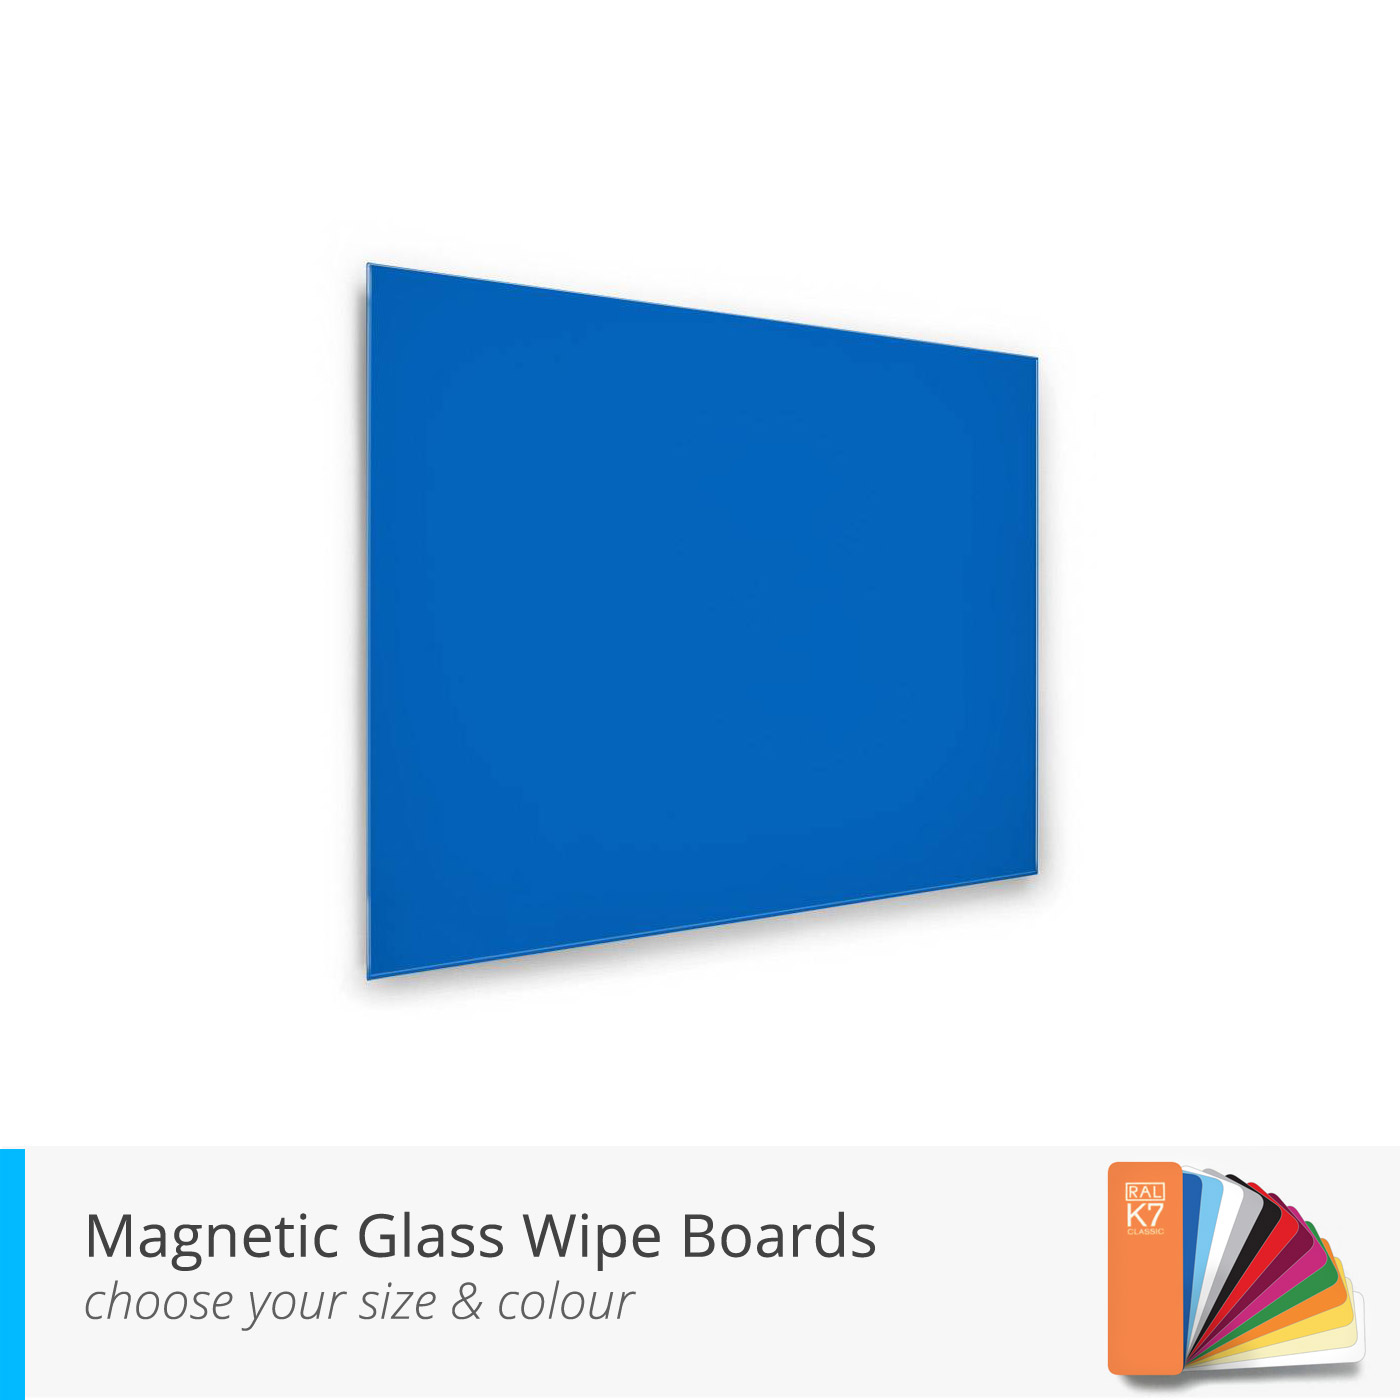 Magnetic Glass Wipe Boards- choose your size & colour